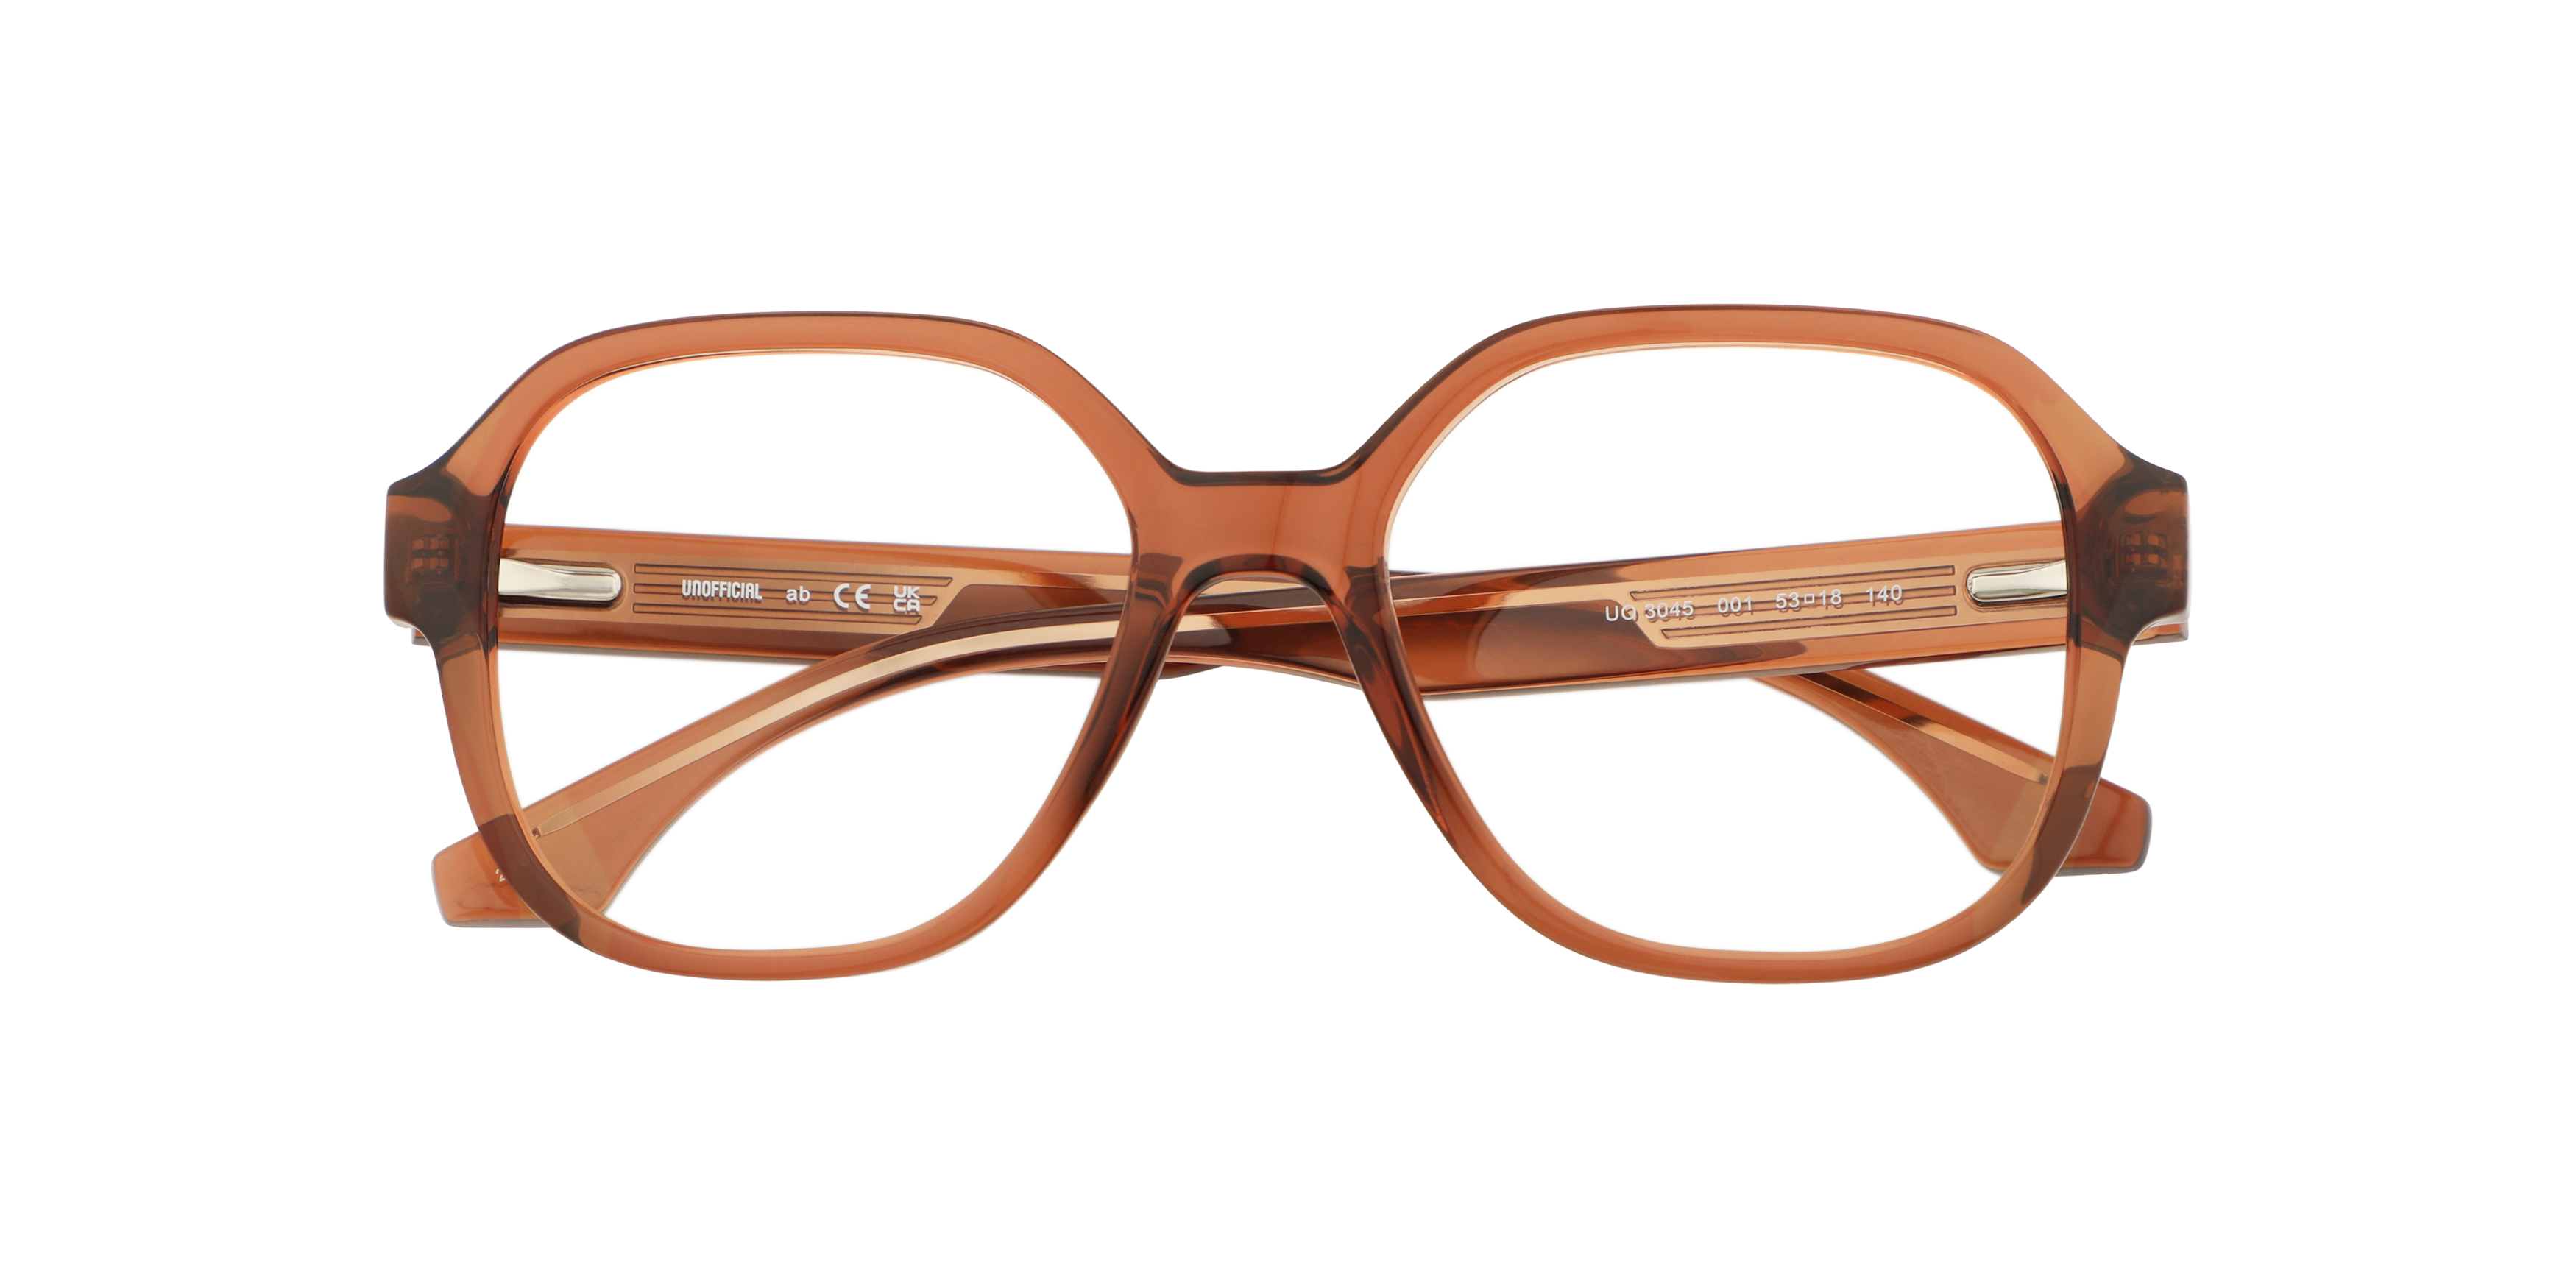 Folded Unofficial UO3045 Glasses Transparent / Transparent, Brown